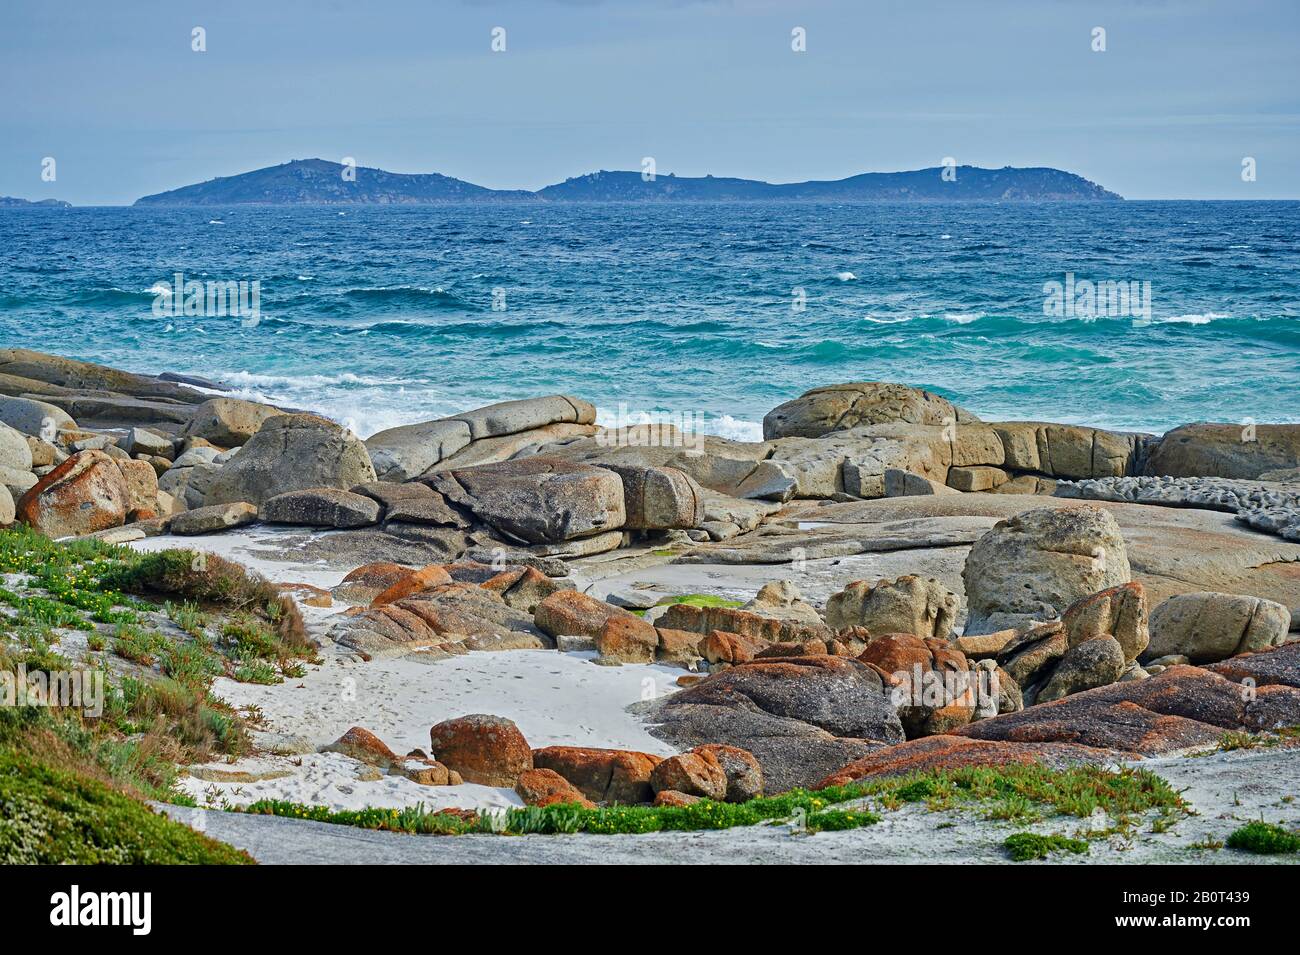 Squeaky Beach at the Wilsons Promontory National Park, Australia, Wilsons Promontory National Park Stock Photo